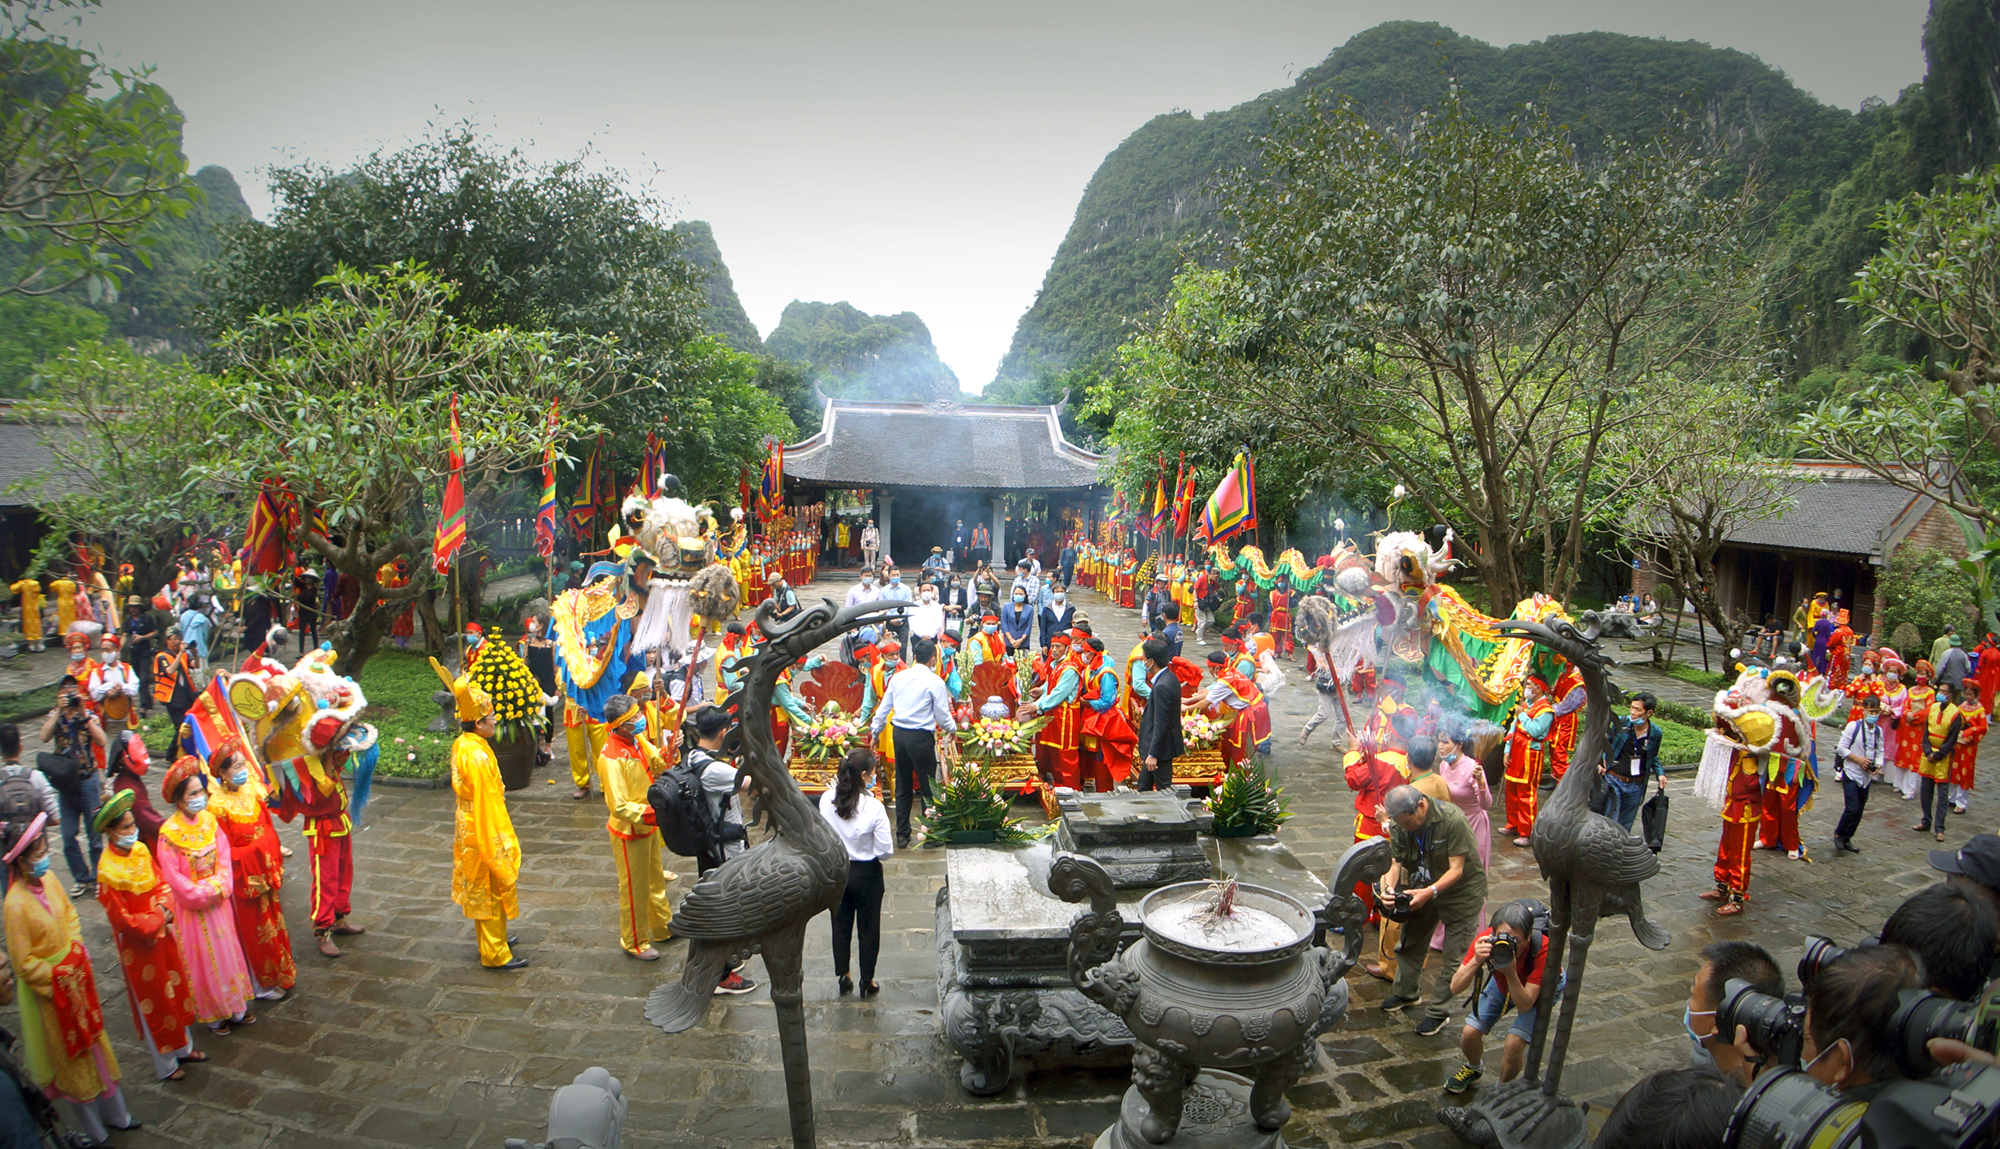 An incense offering ceremony in commemoration of legendary national hero Saint Quy Minh